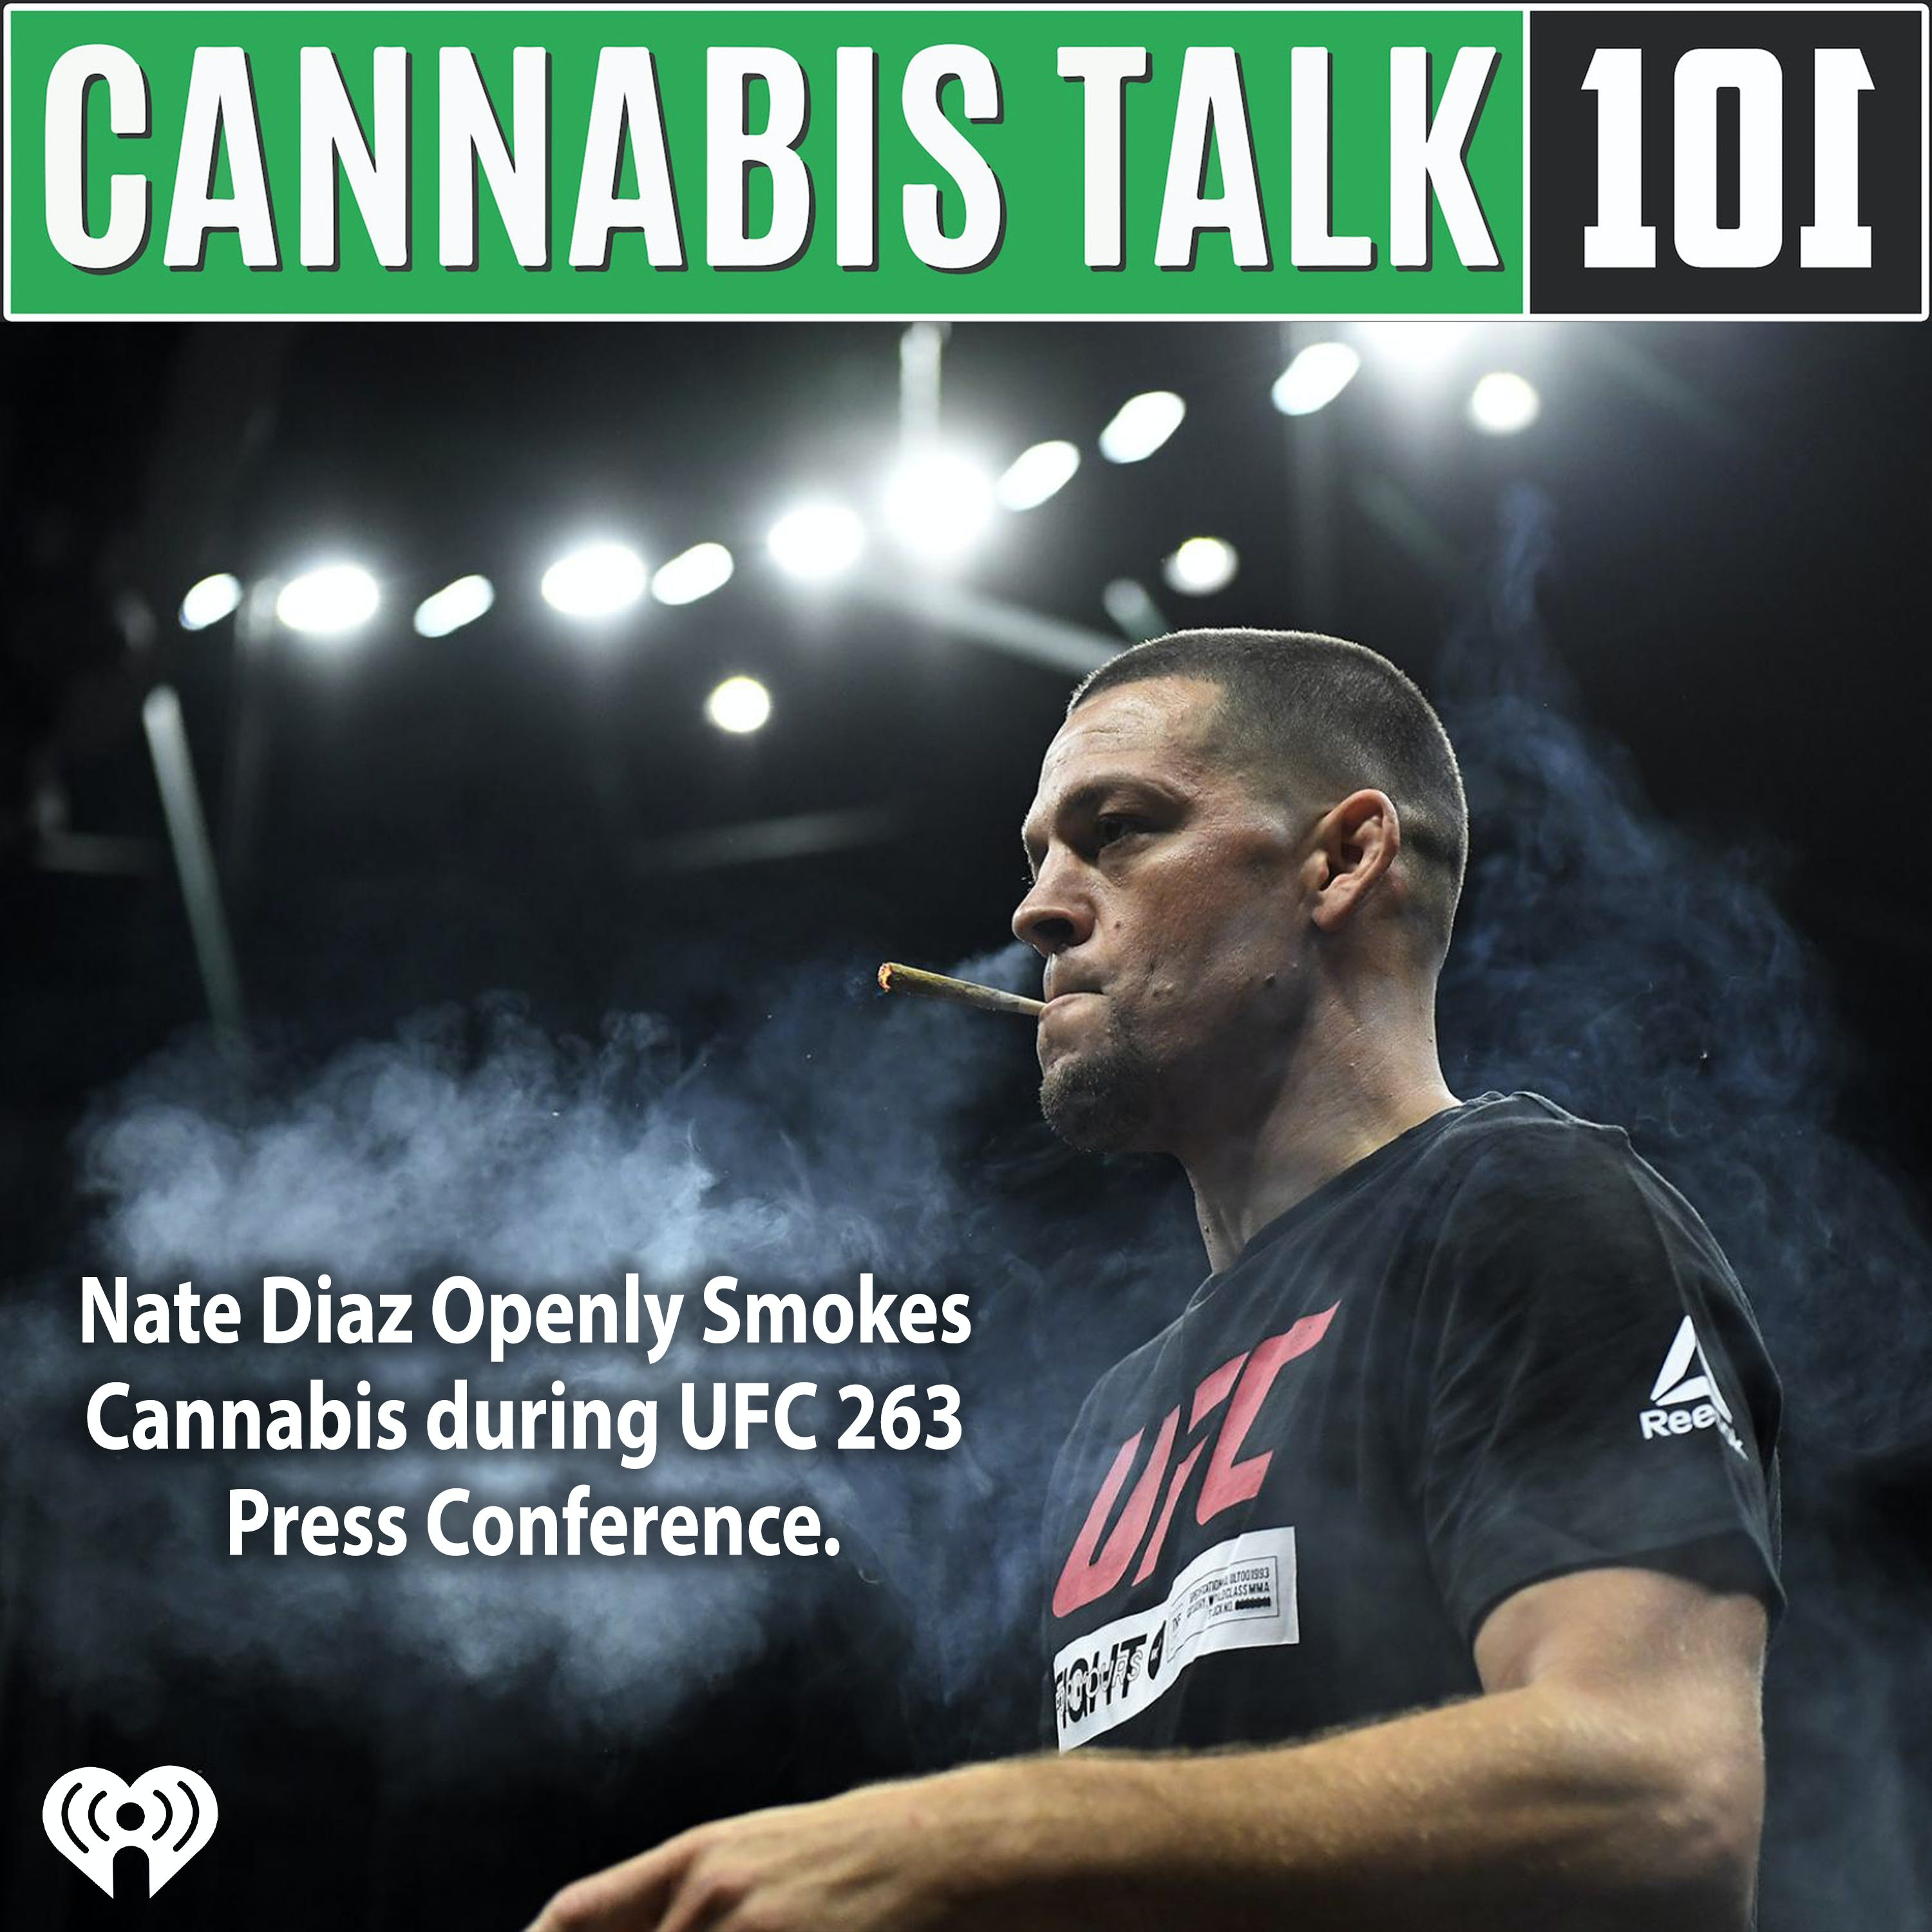 Nate Diaz Openly Smokes Cannabis during UFC 263 Press Conference.